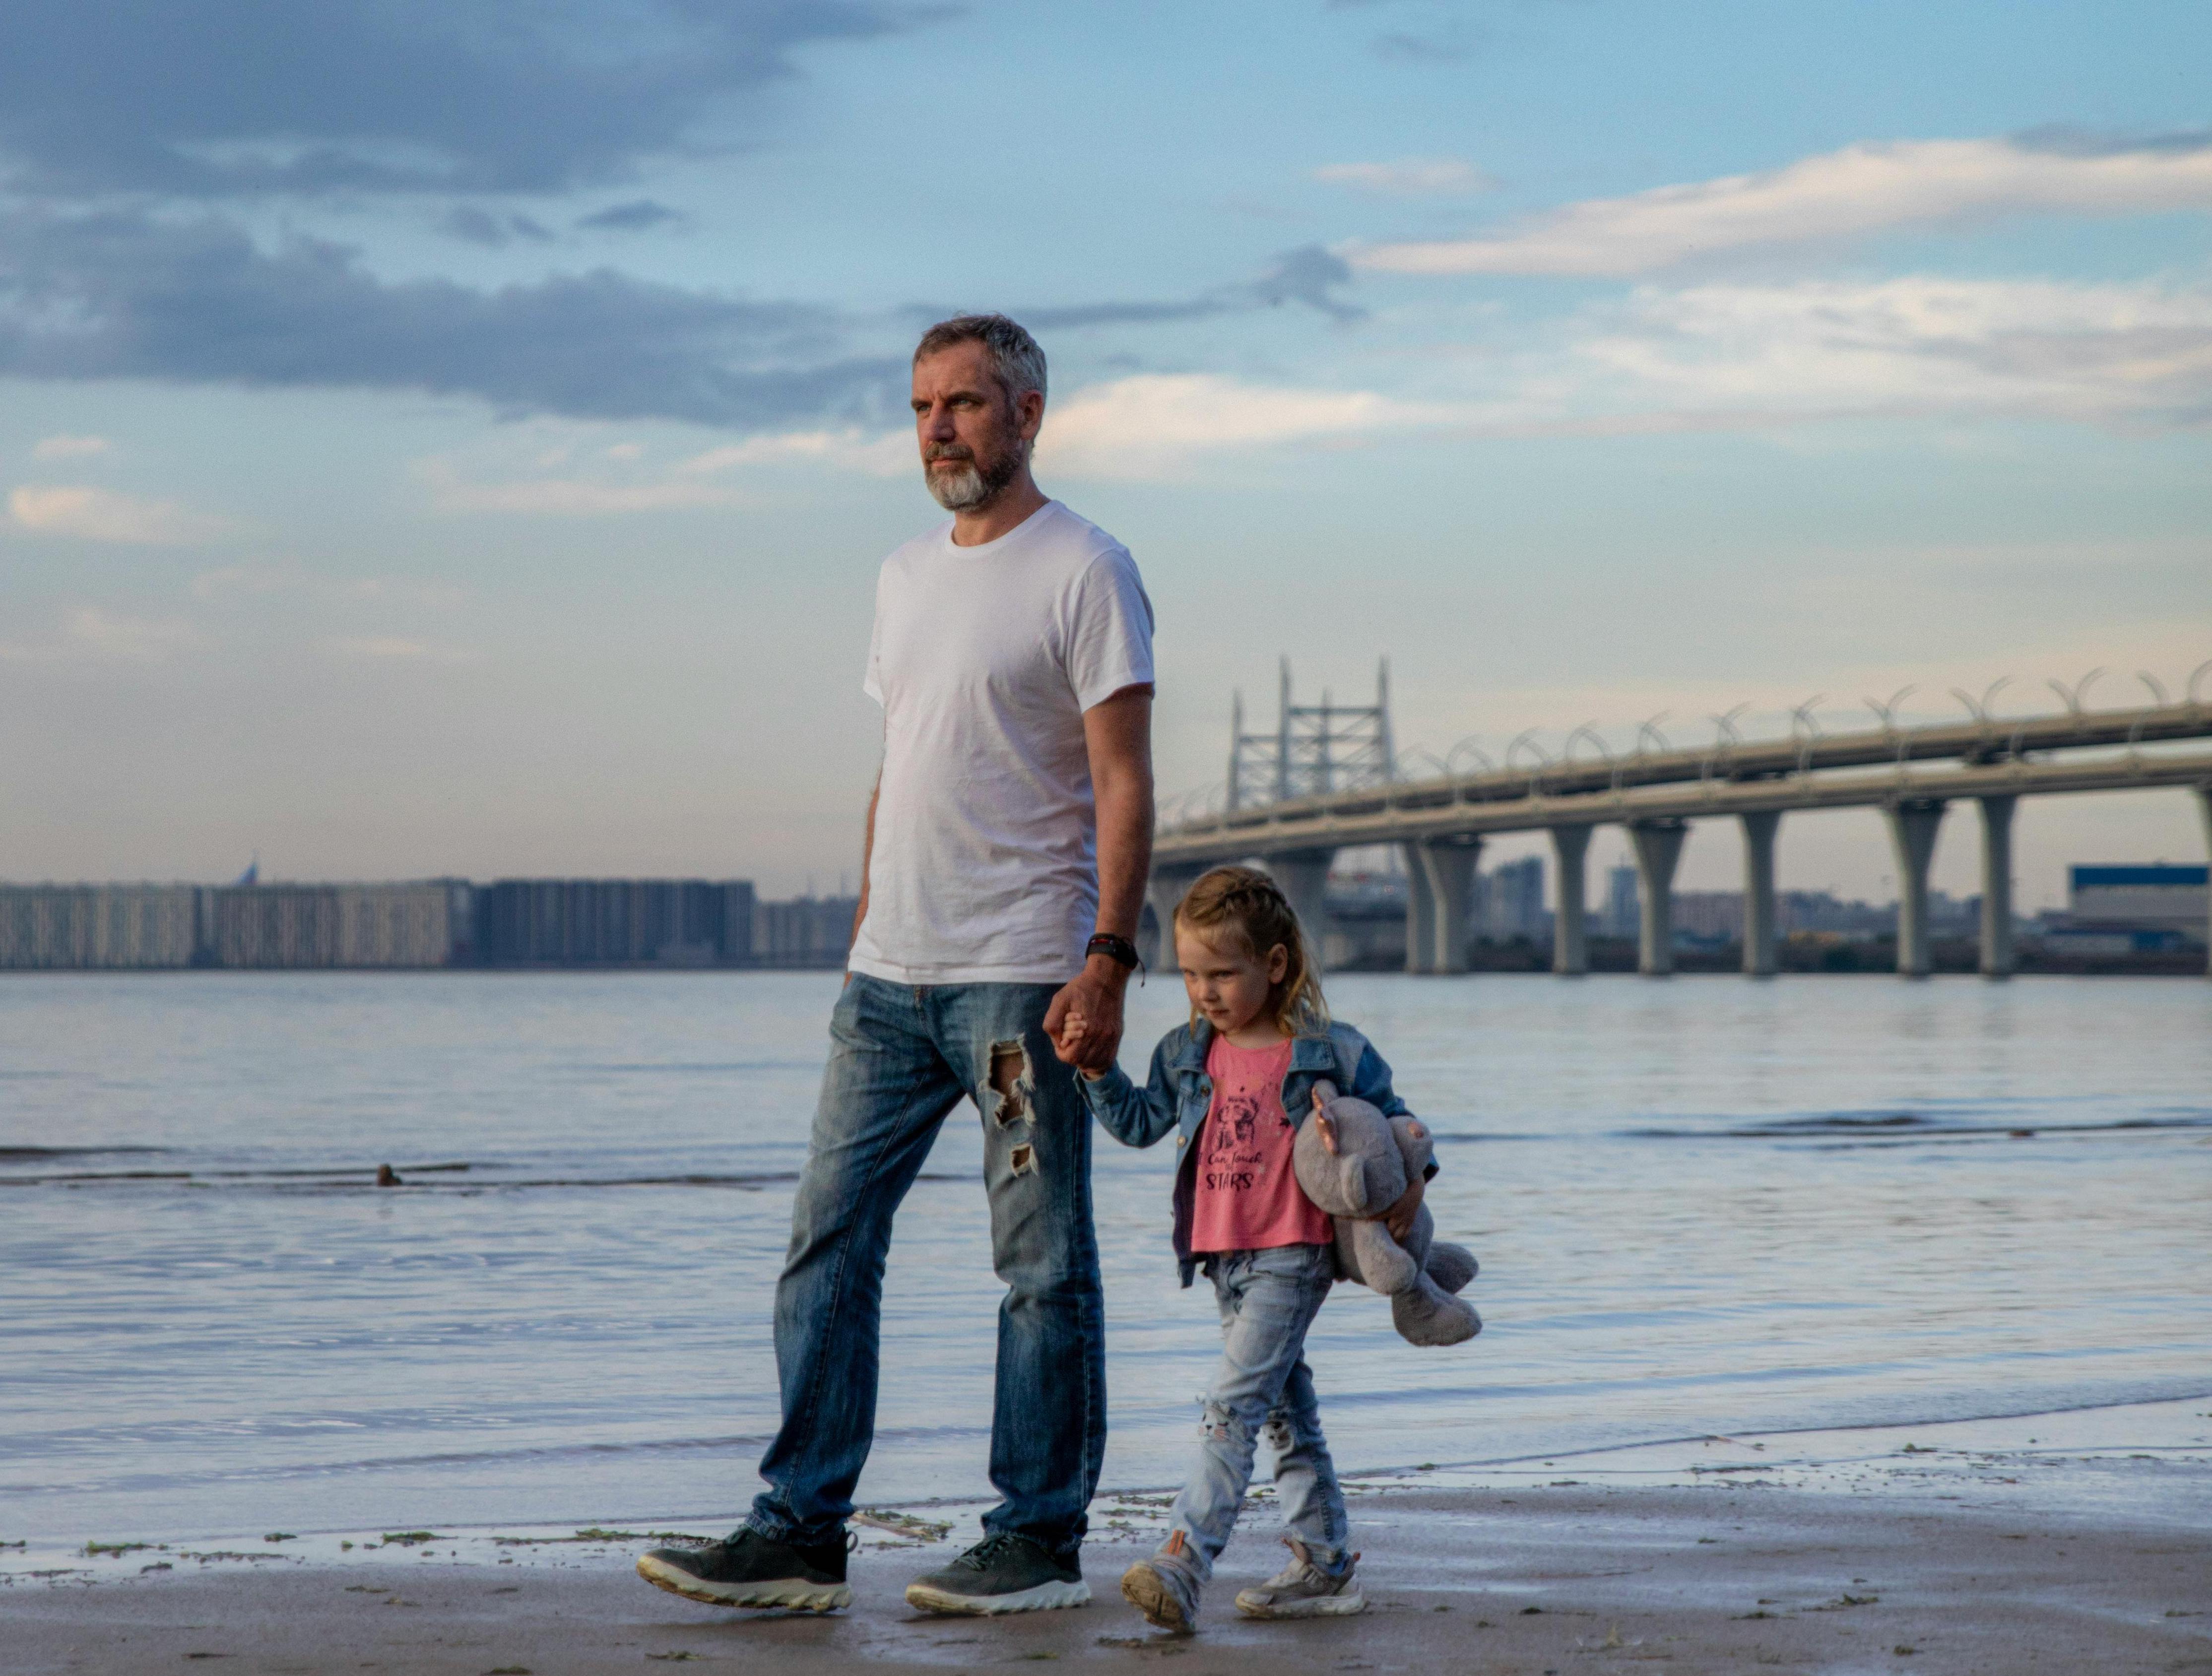 Photo by iddea photo: https://www.pexels.com/photo/father-walking-with-daughter-on-beach-17374483/